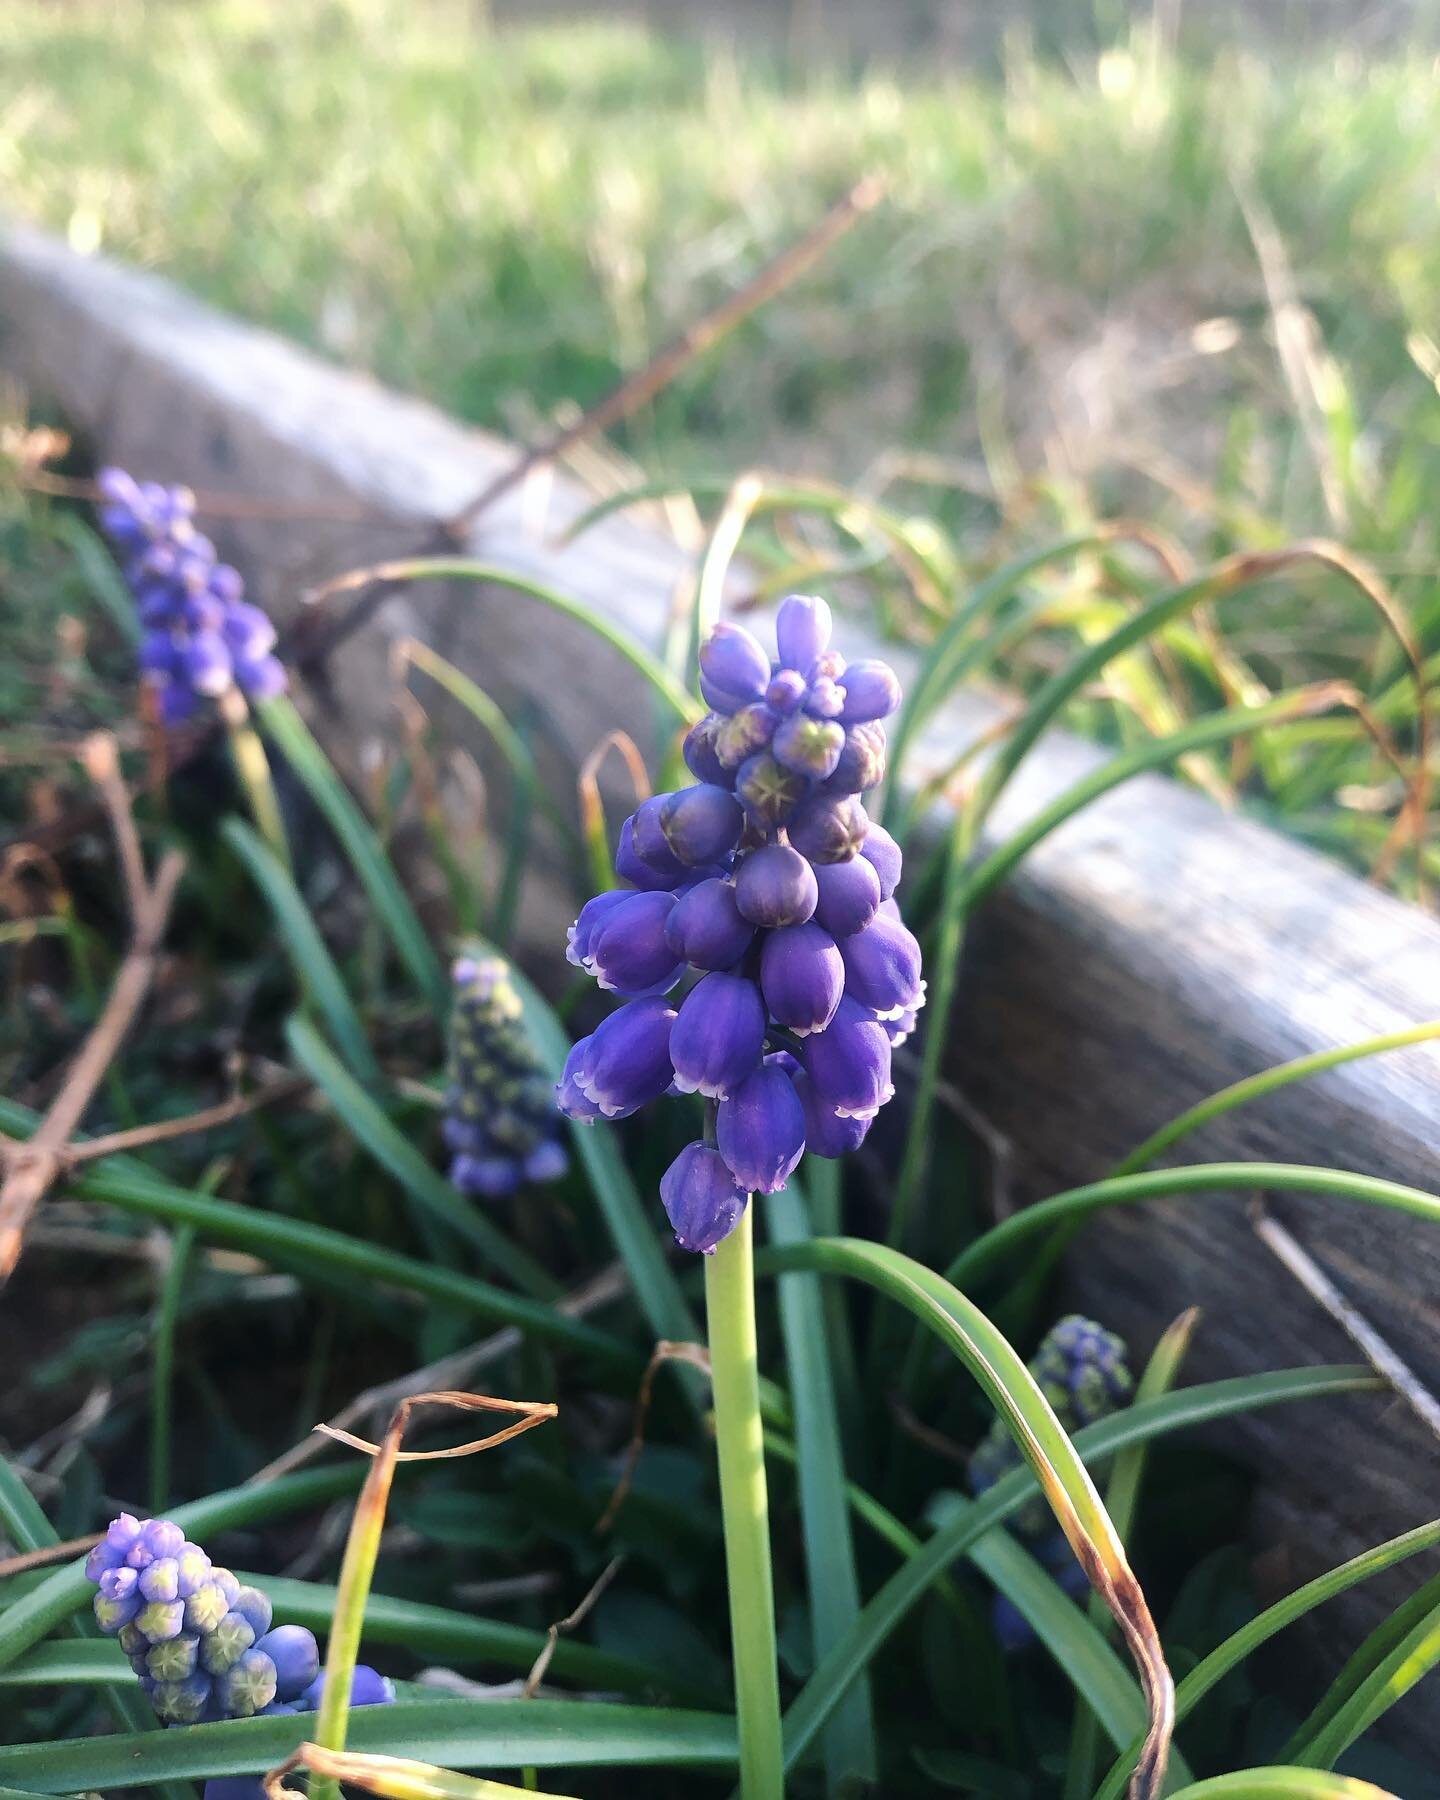 &ldquo;You gave me hyacinths first a year ago,
They called me the hyacinth girl.&rdquo;

Saying hello to these little wild grape hyacinths, among the first flowers of early spring. I love to make a beautiful light purple syrup with the buds, which sm